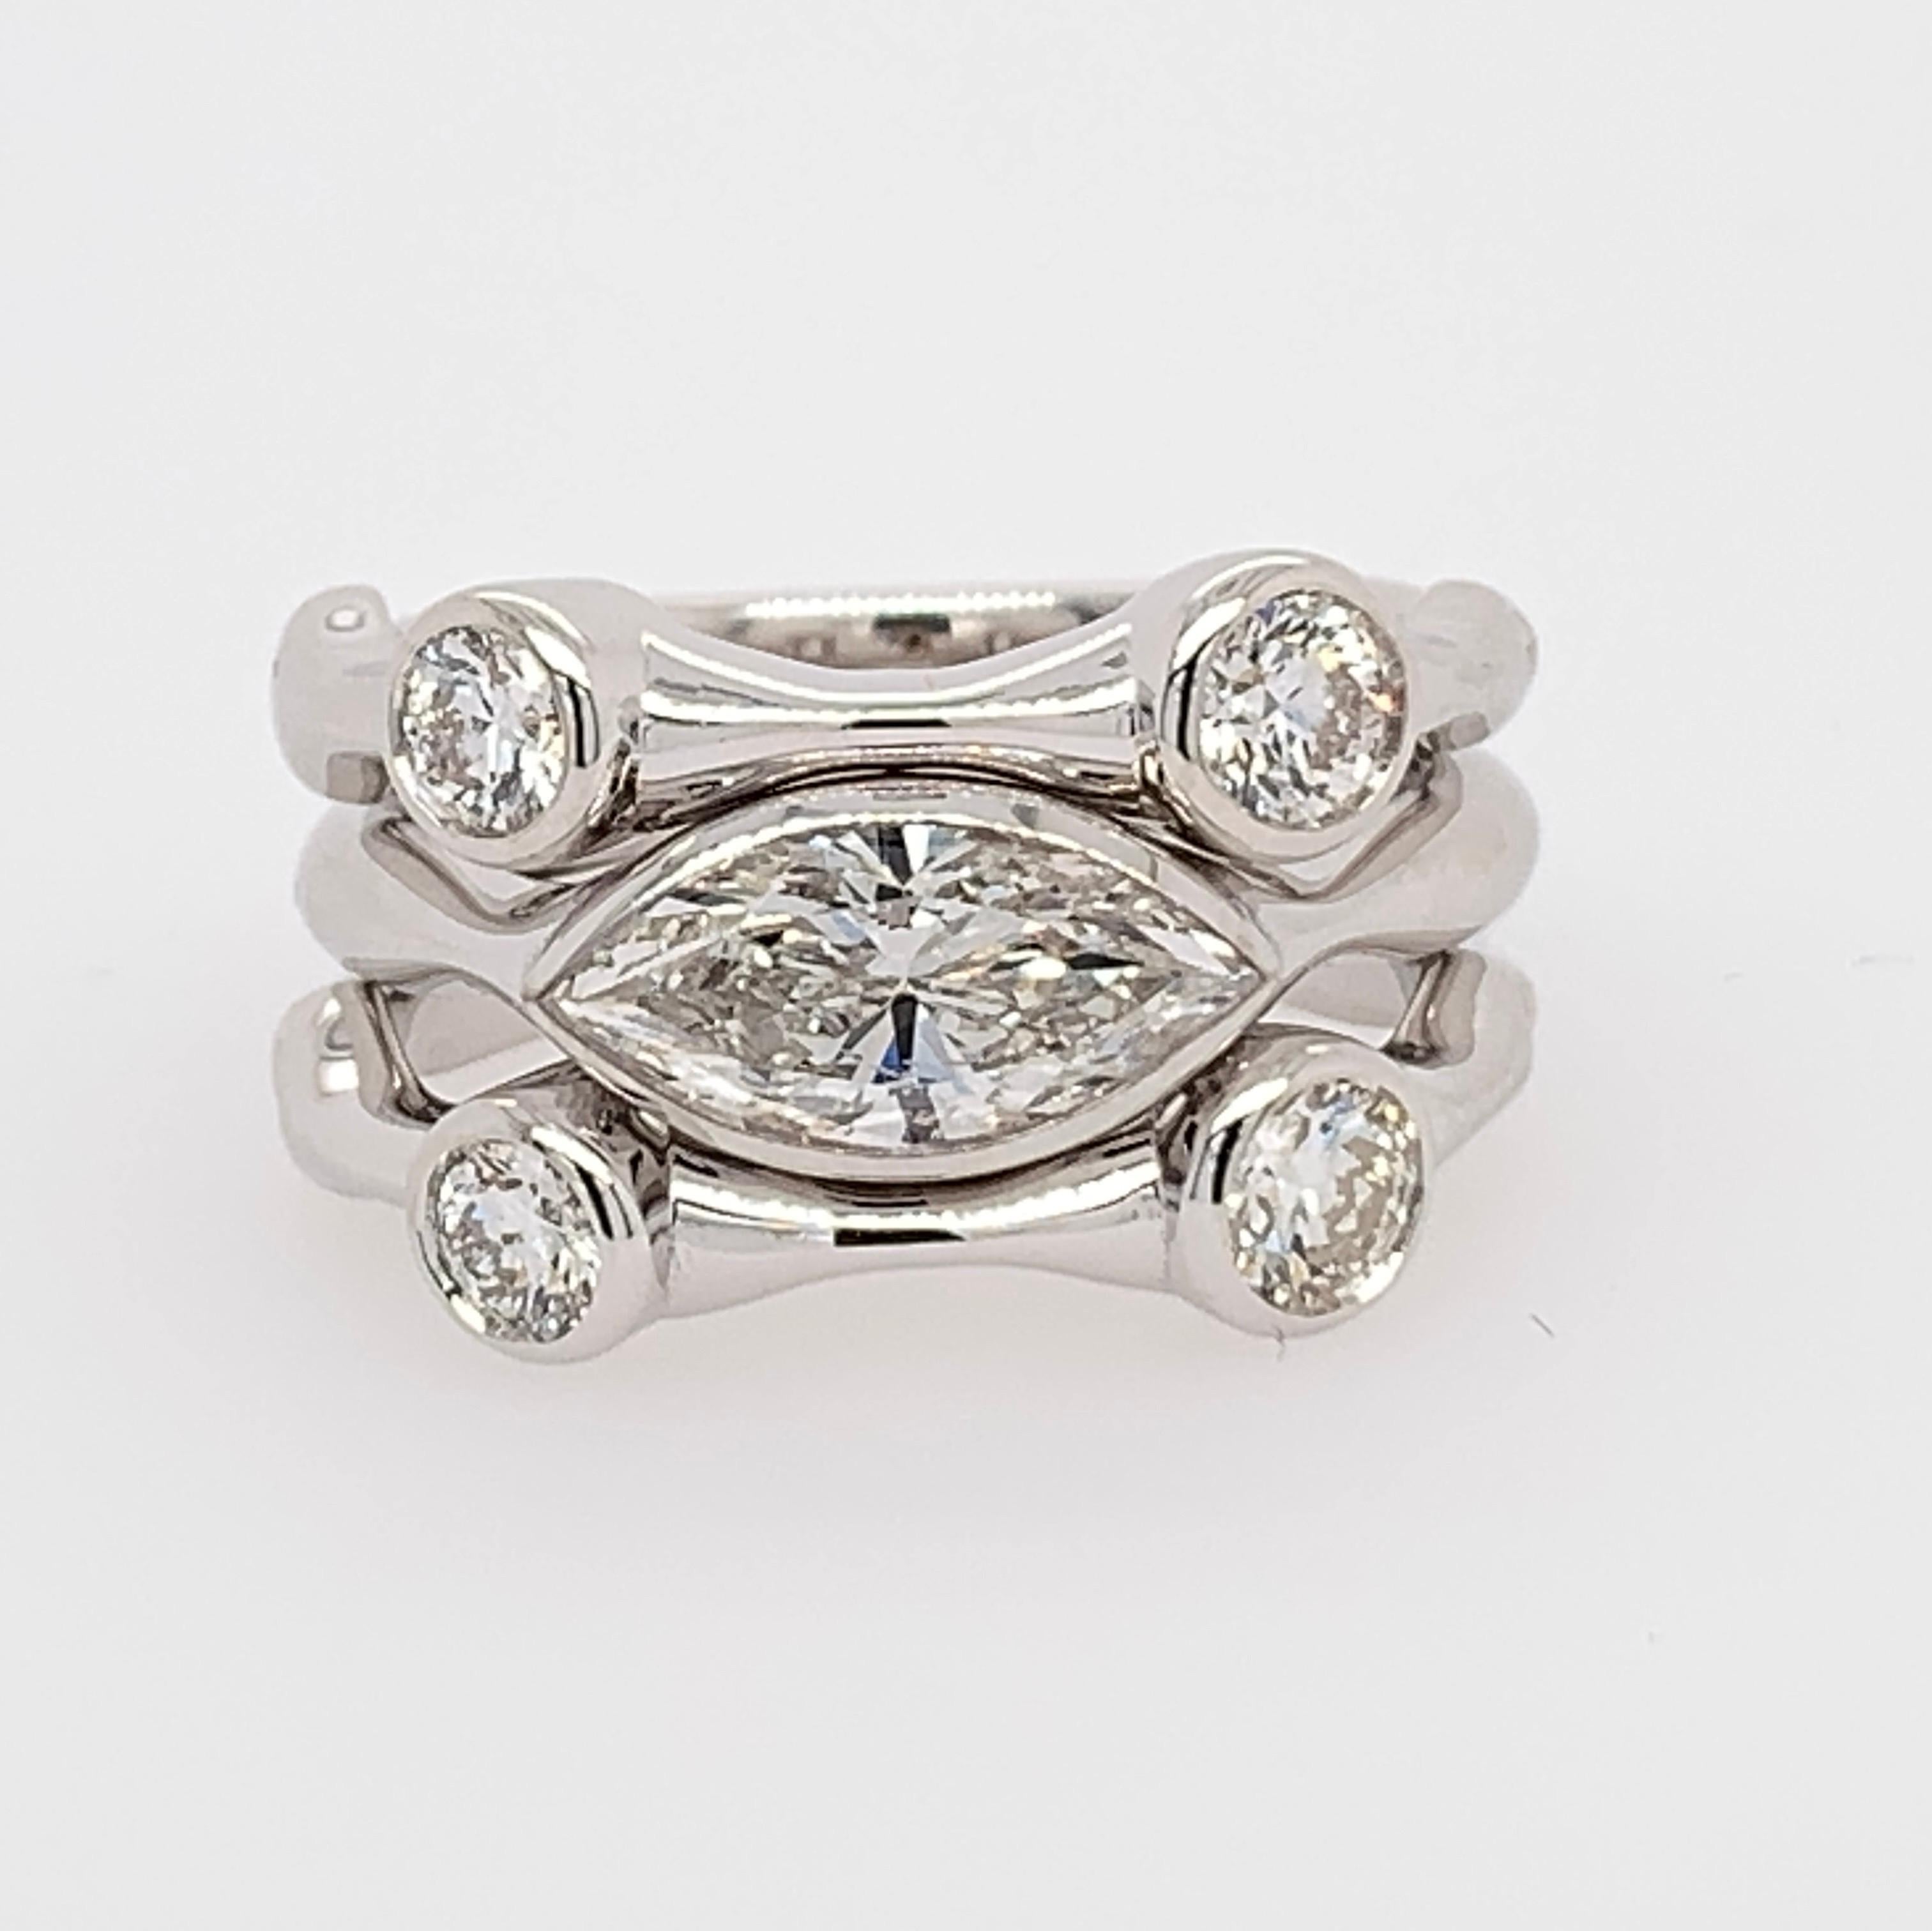 Stunning 18K White Gold Natural Diamond Cocktail Stack Ring Set. The rings are size 5.25 and weigh 10.52 grams.

The center ring is set with a 1.00 carat Natural Marquise Diamond certified by EGL as a G in color and SI1 in clarity (#LA210502031) and